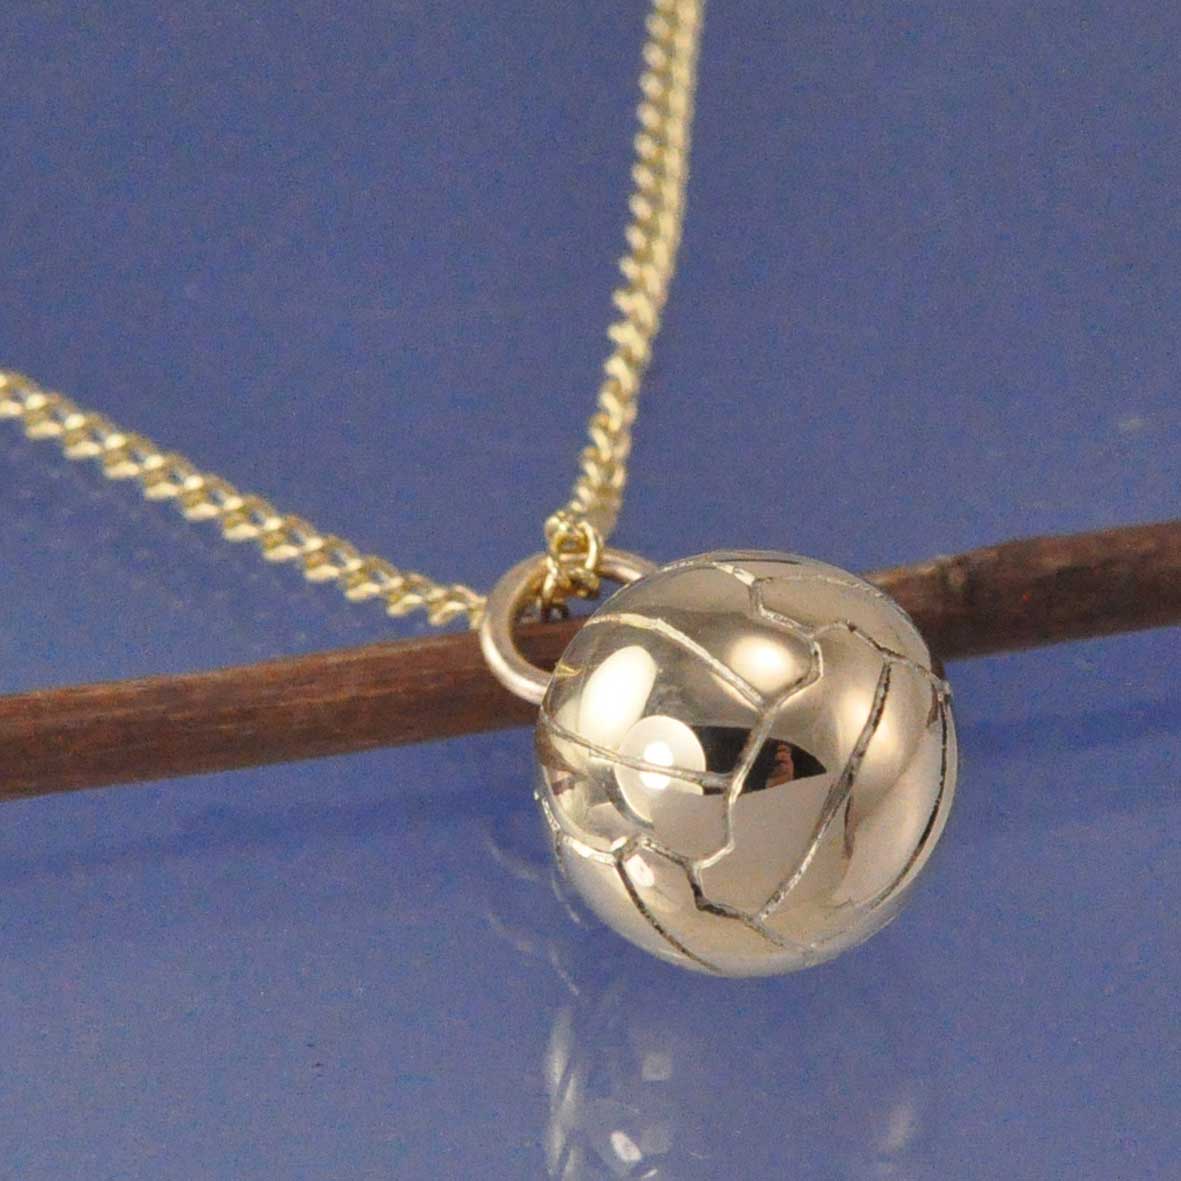 Cremation Ash Necklace - Football. Pendant by Chris Parry Jewellery